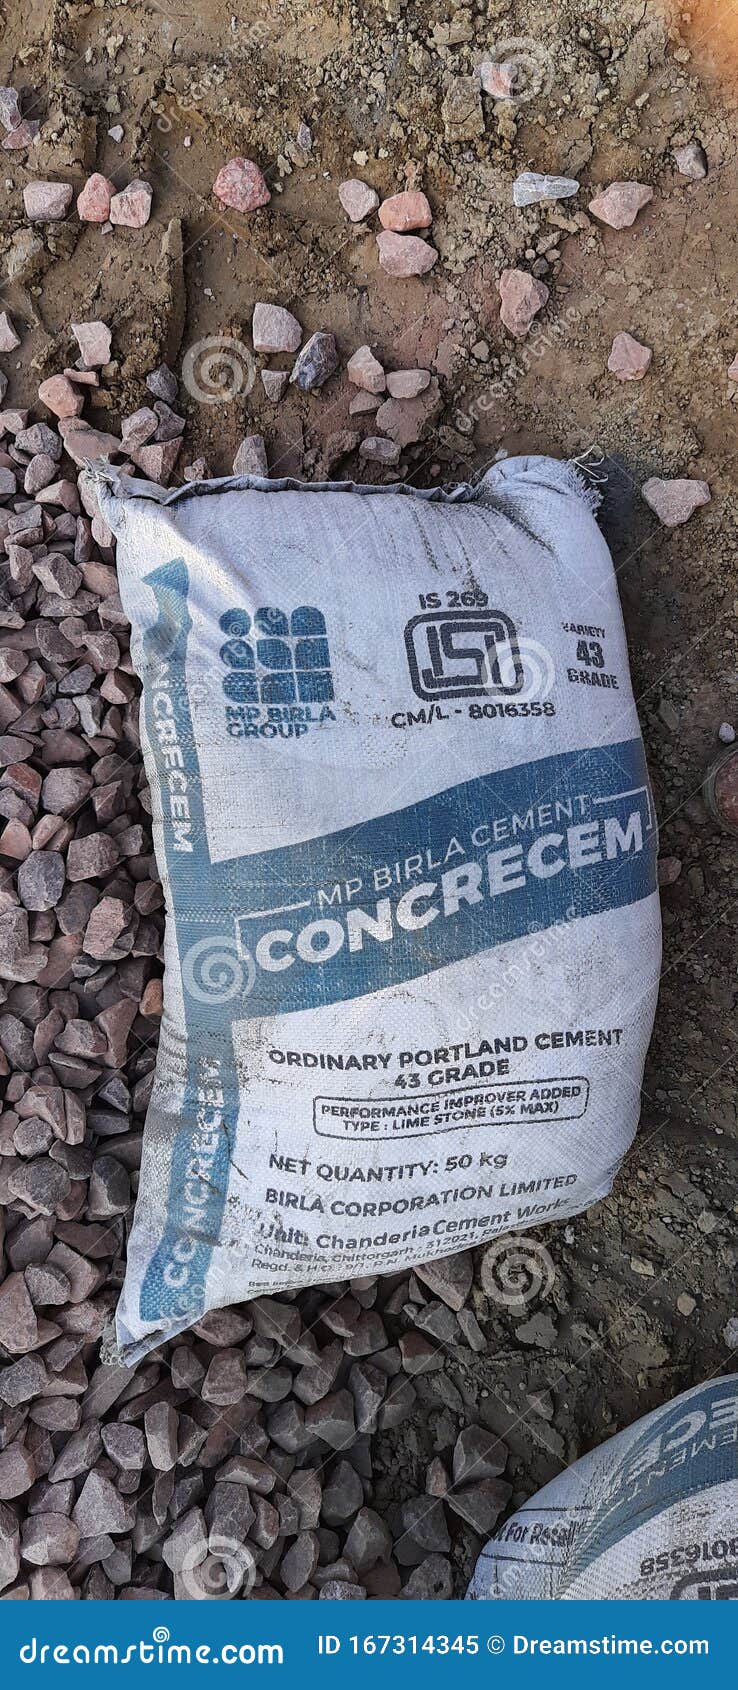 The volume of one bag of cement weighing 50 kg is: